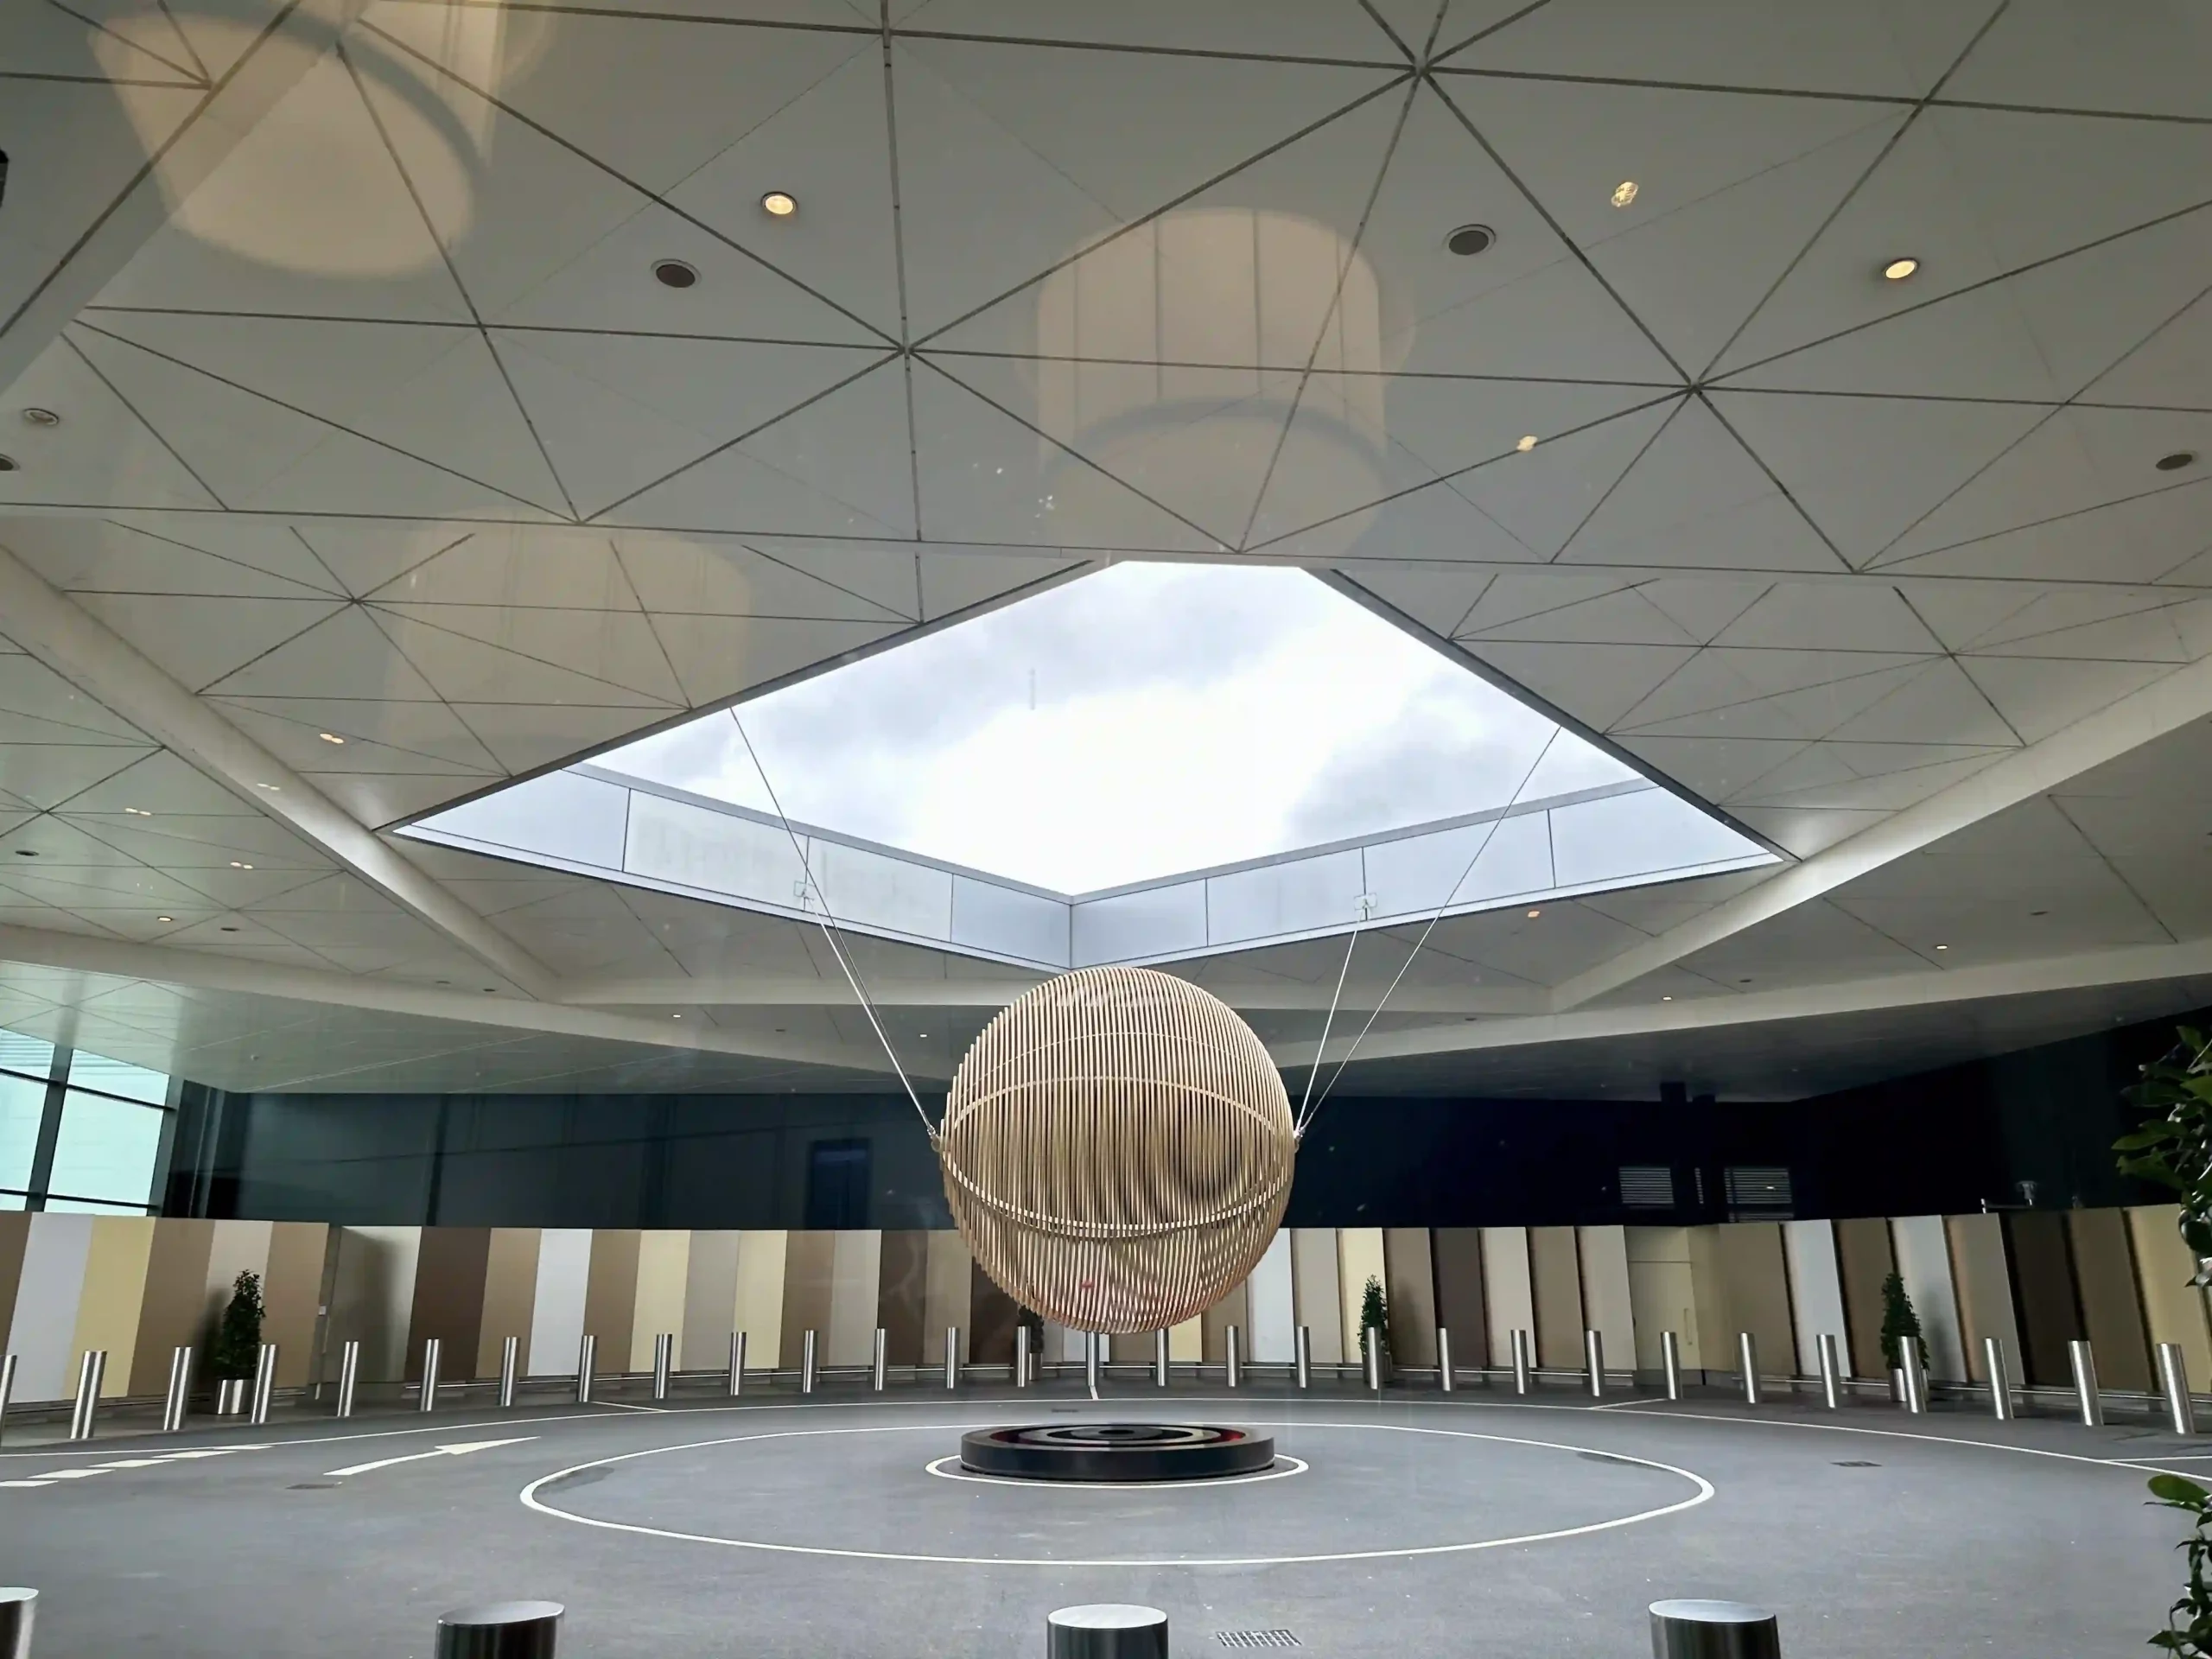 a large circular object in a room